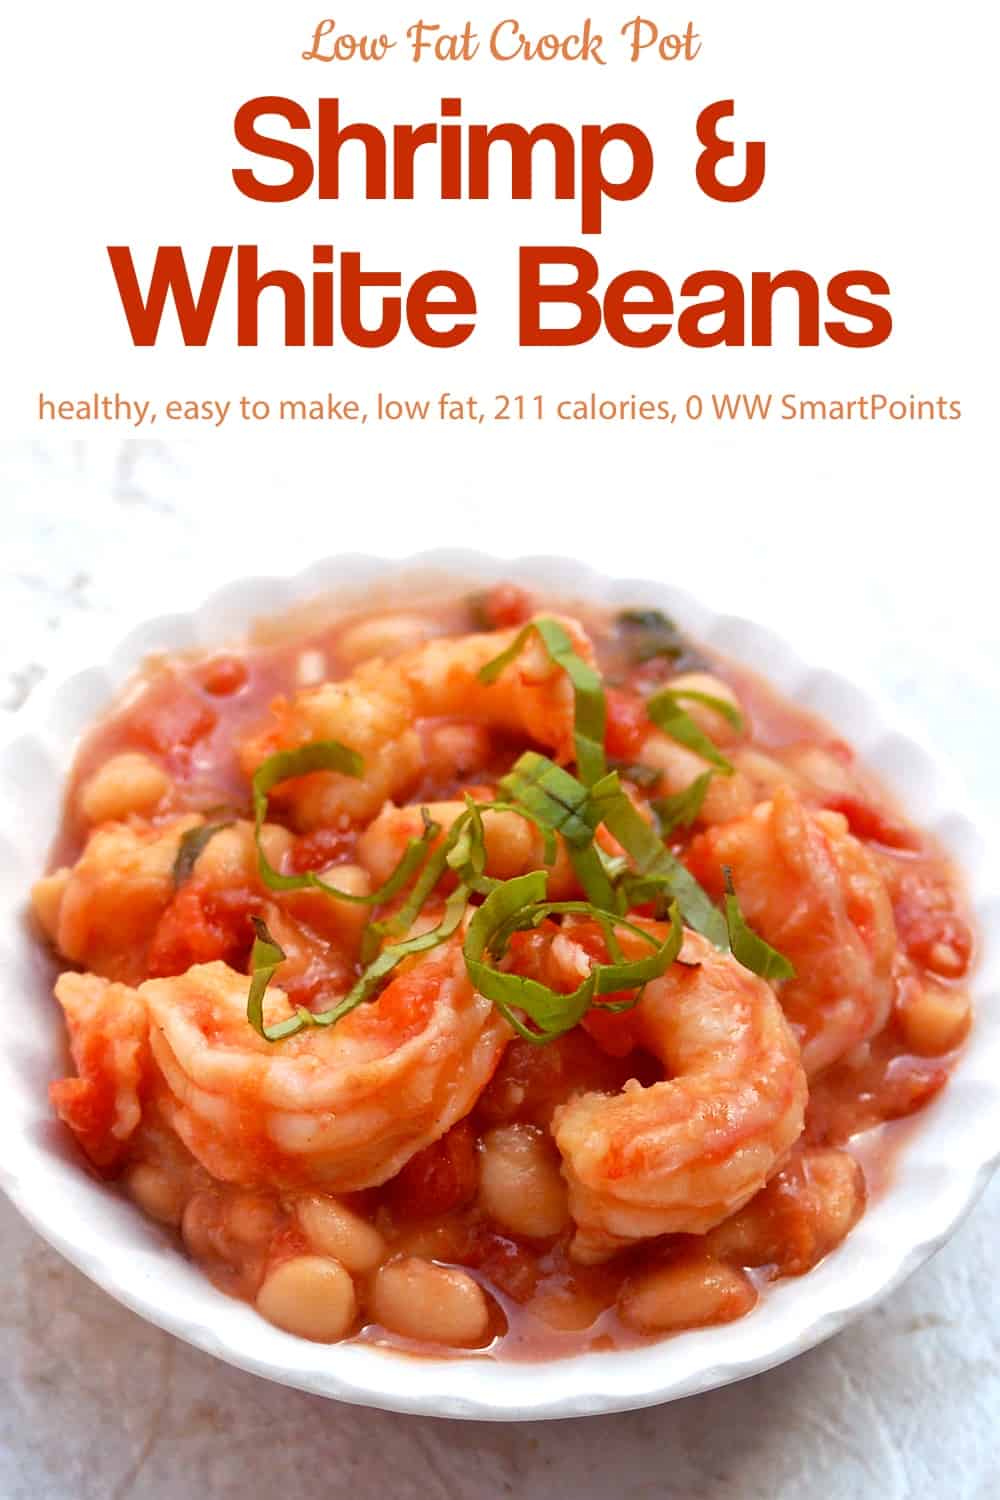 White beans with shrimp in light tomato sauce topped with sliced fresh basil in white bowl.